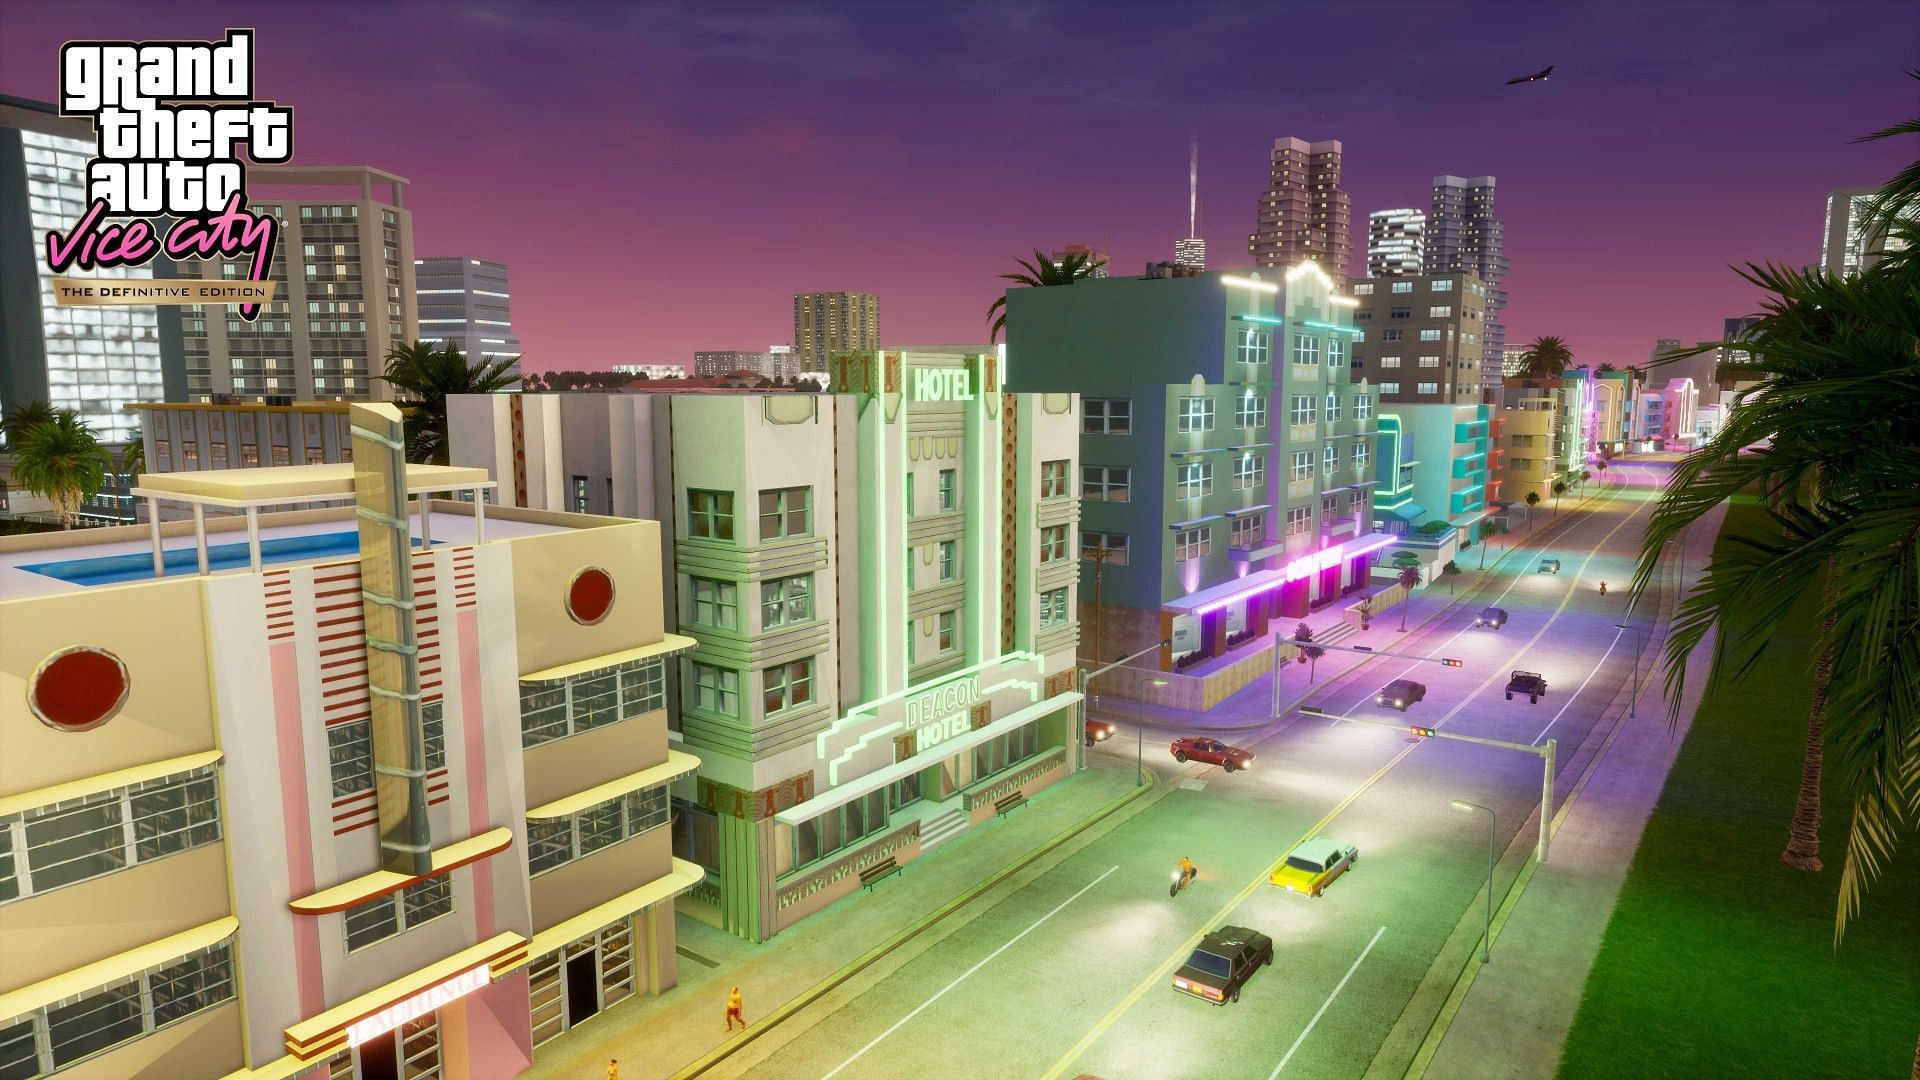 Which real-life cities have inspired the major cities of GTA?